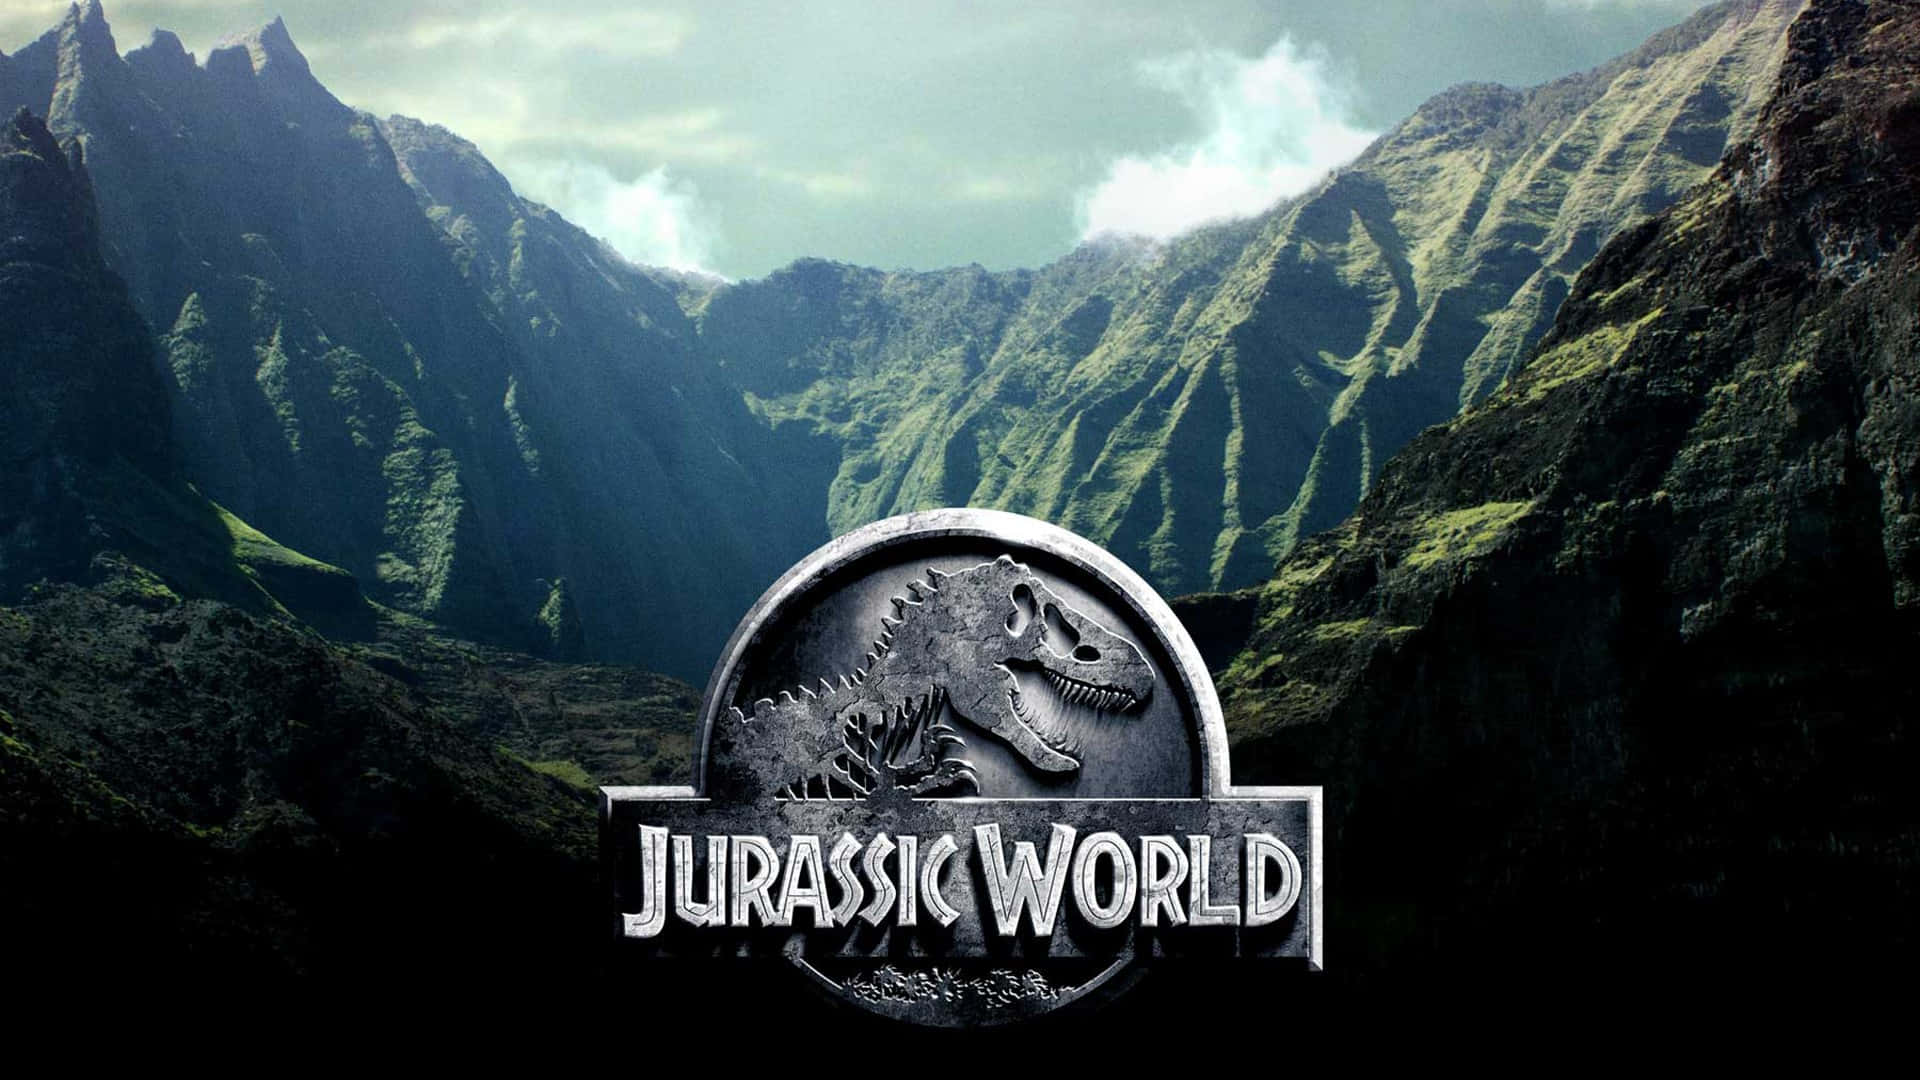 Jurassic World Logo With Mountains In The Background